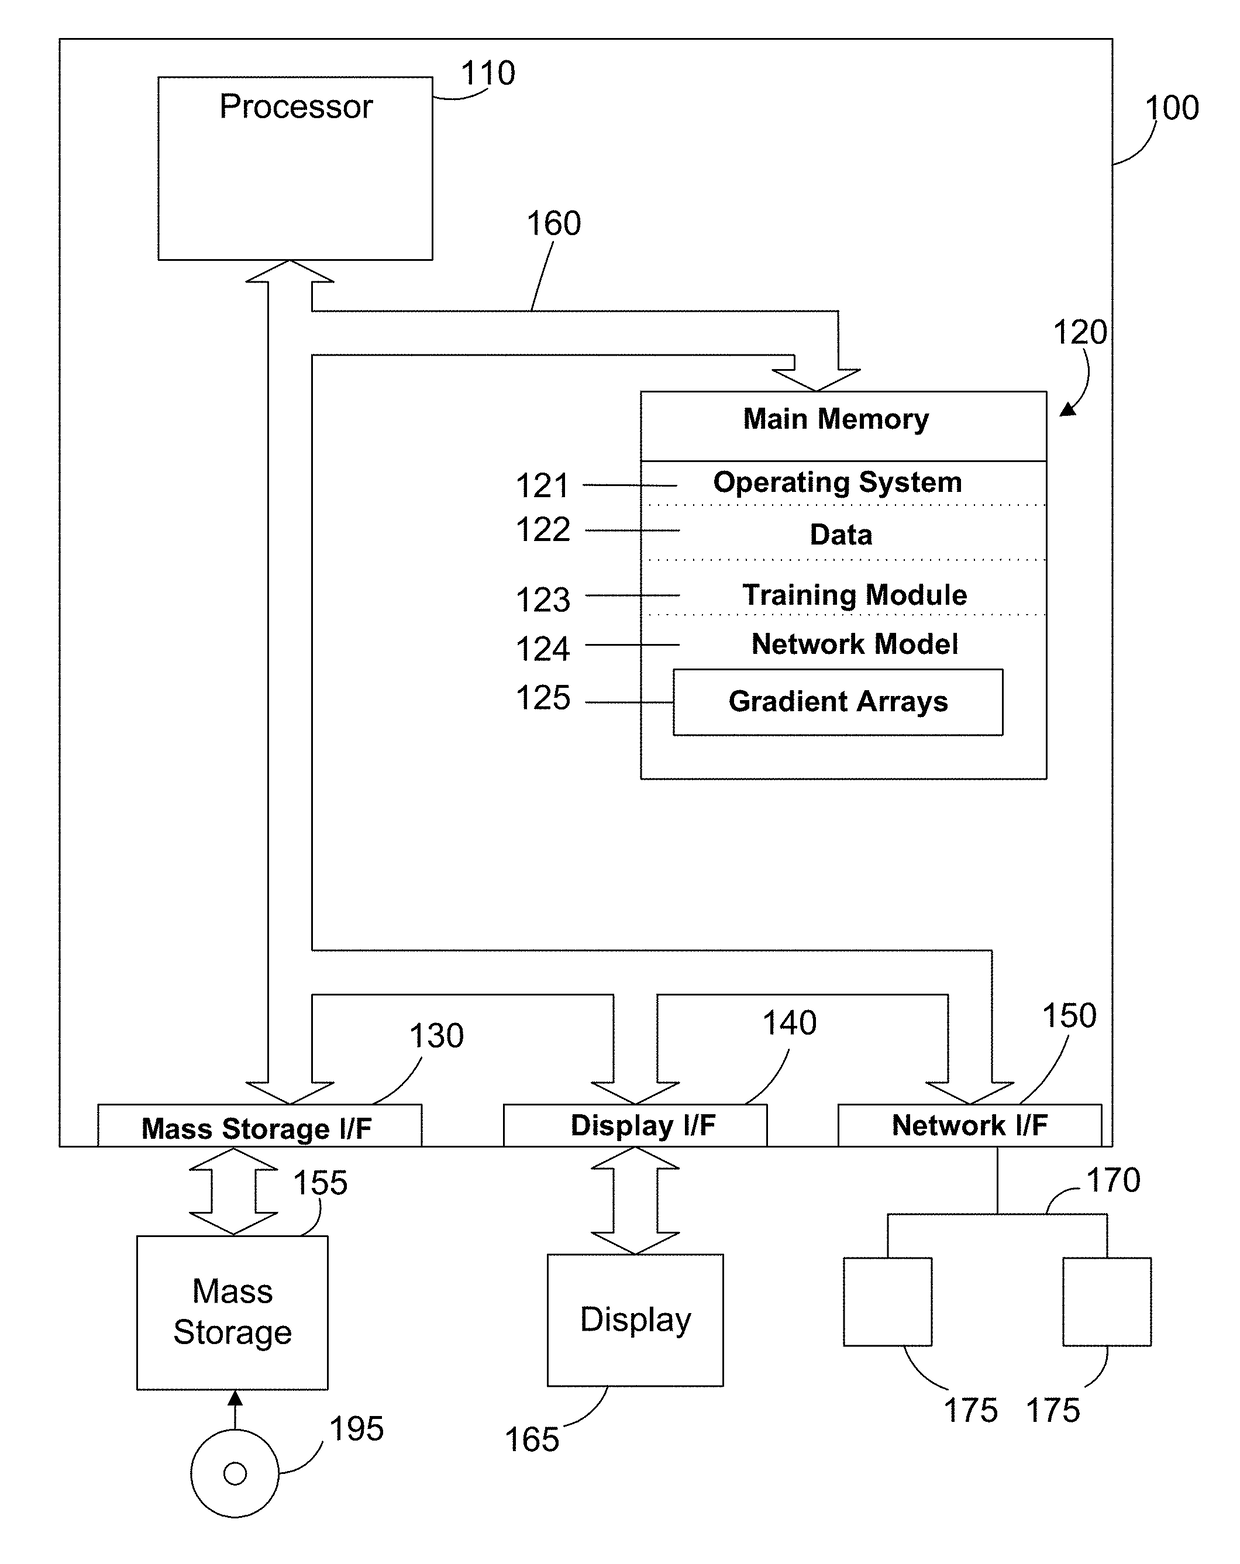 Efficient parallel training of a network model on multiple graphics processing units